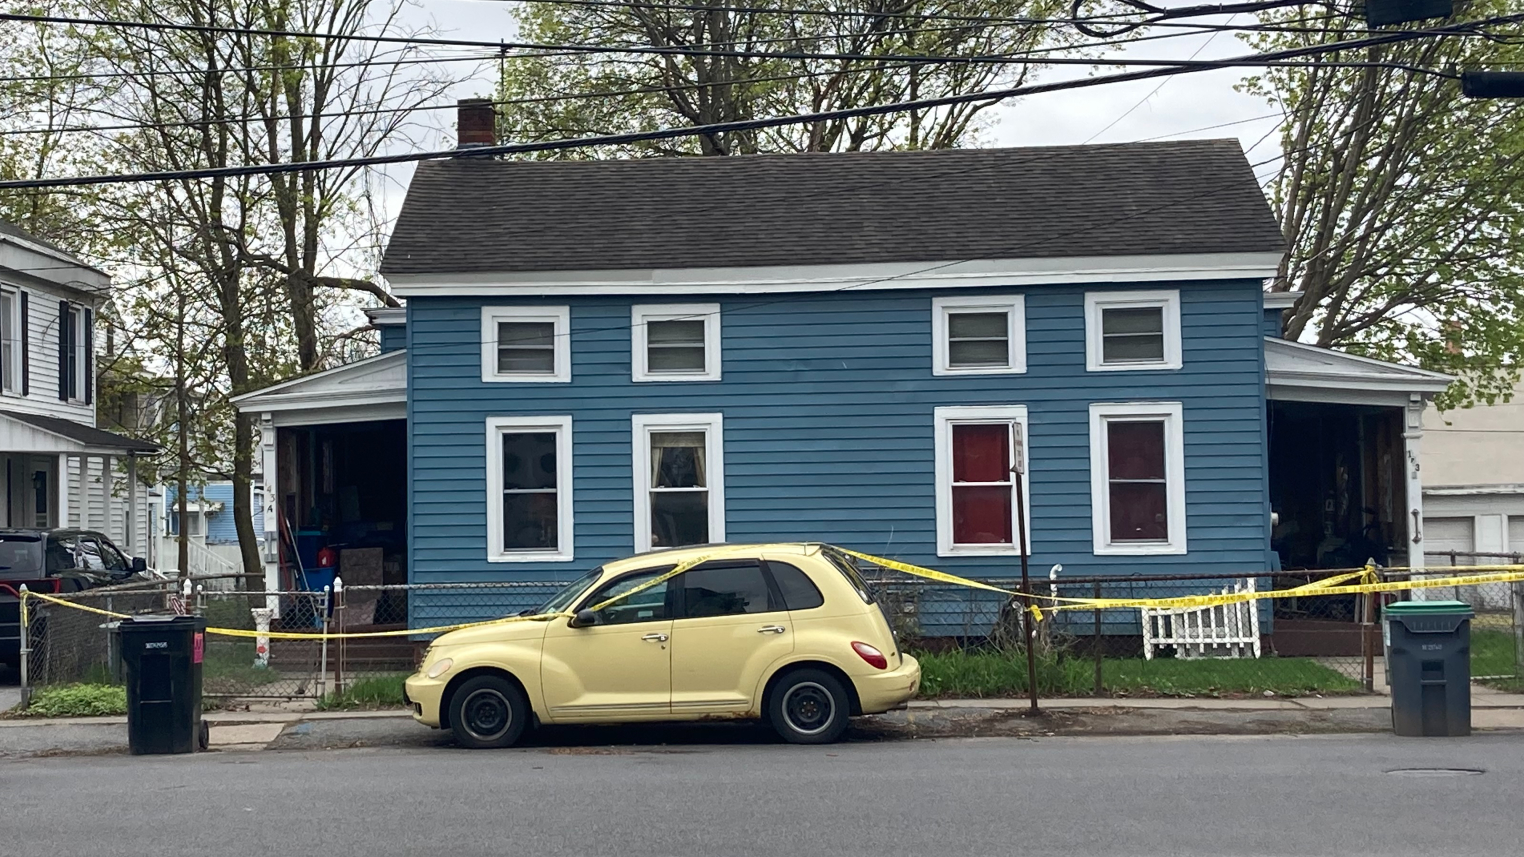 Police: Glens Falls woman found dead in apartment covered in ‘household items’